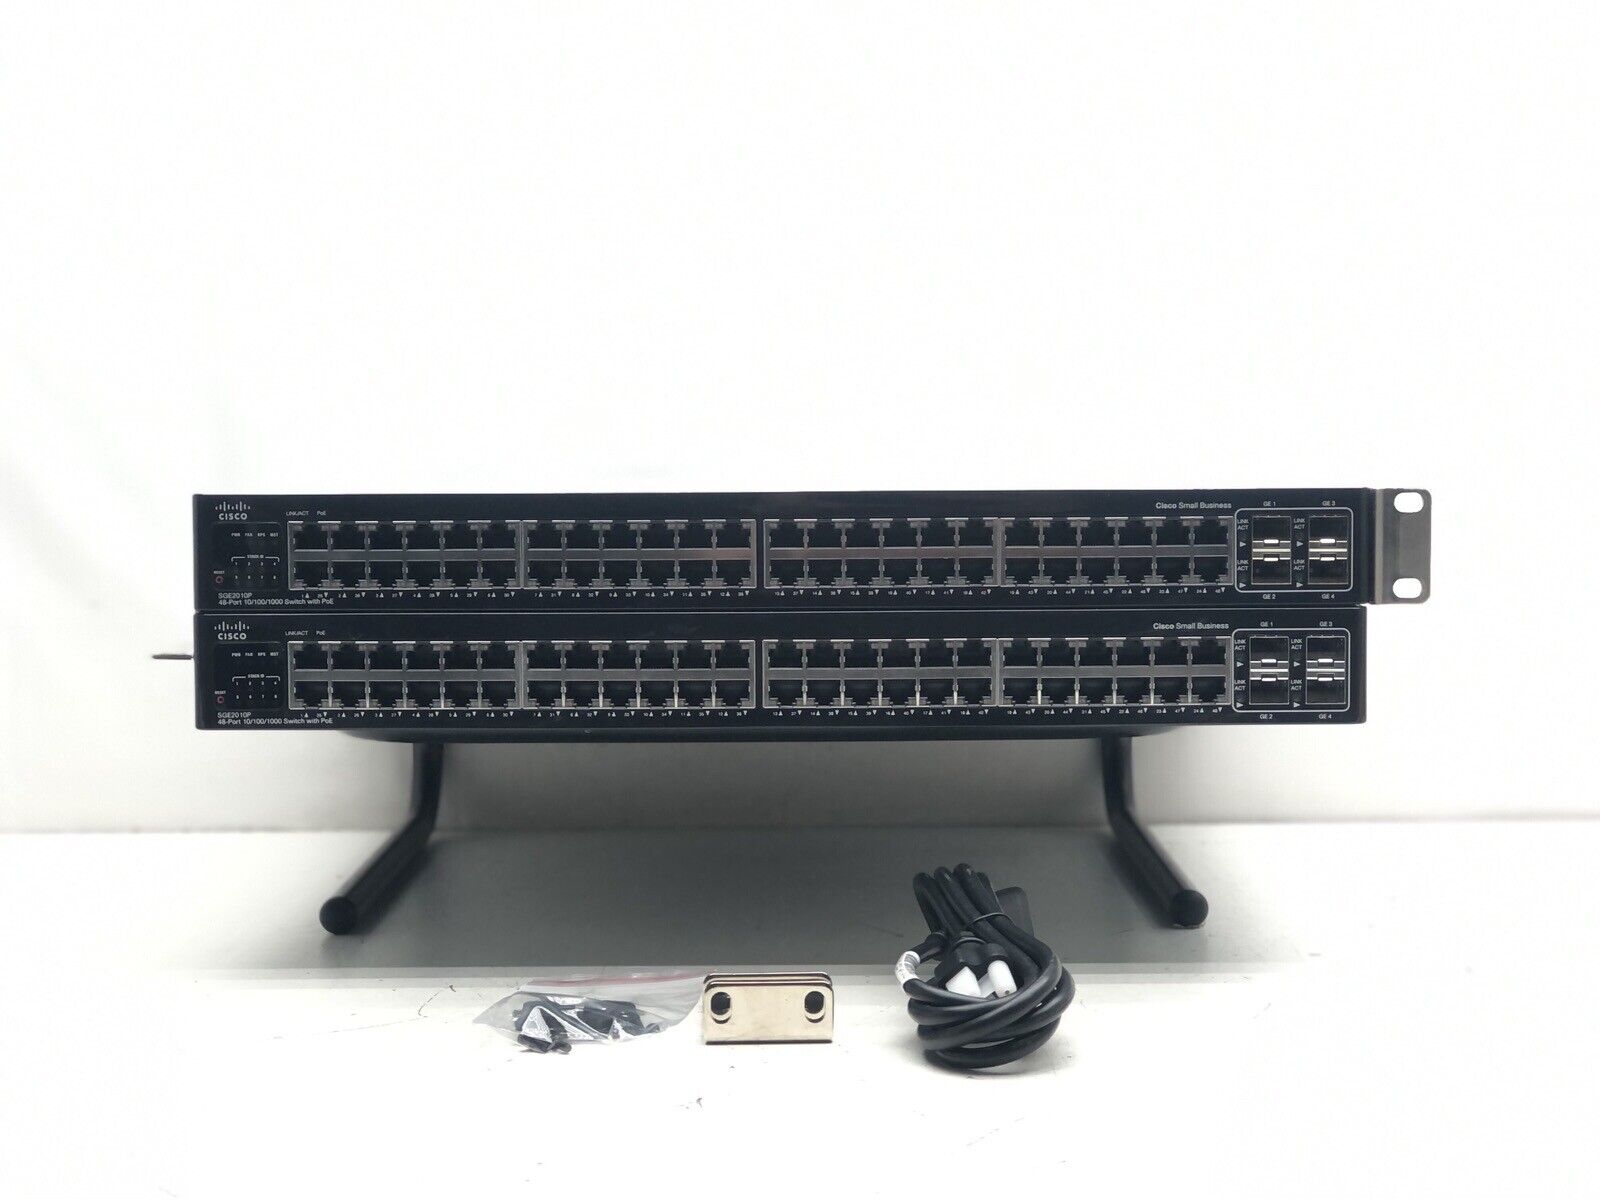 Lot of 2 Cisco SGE2010P 48-Port 10/100/1000 Switch with PoE